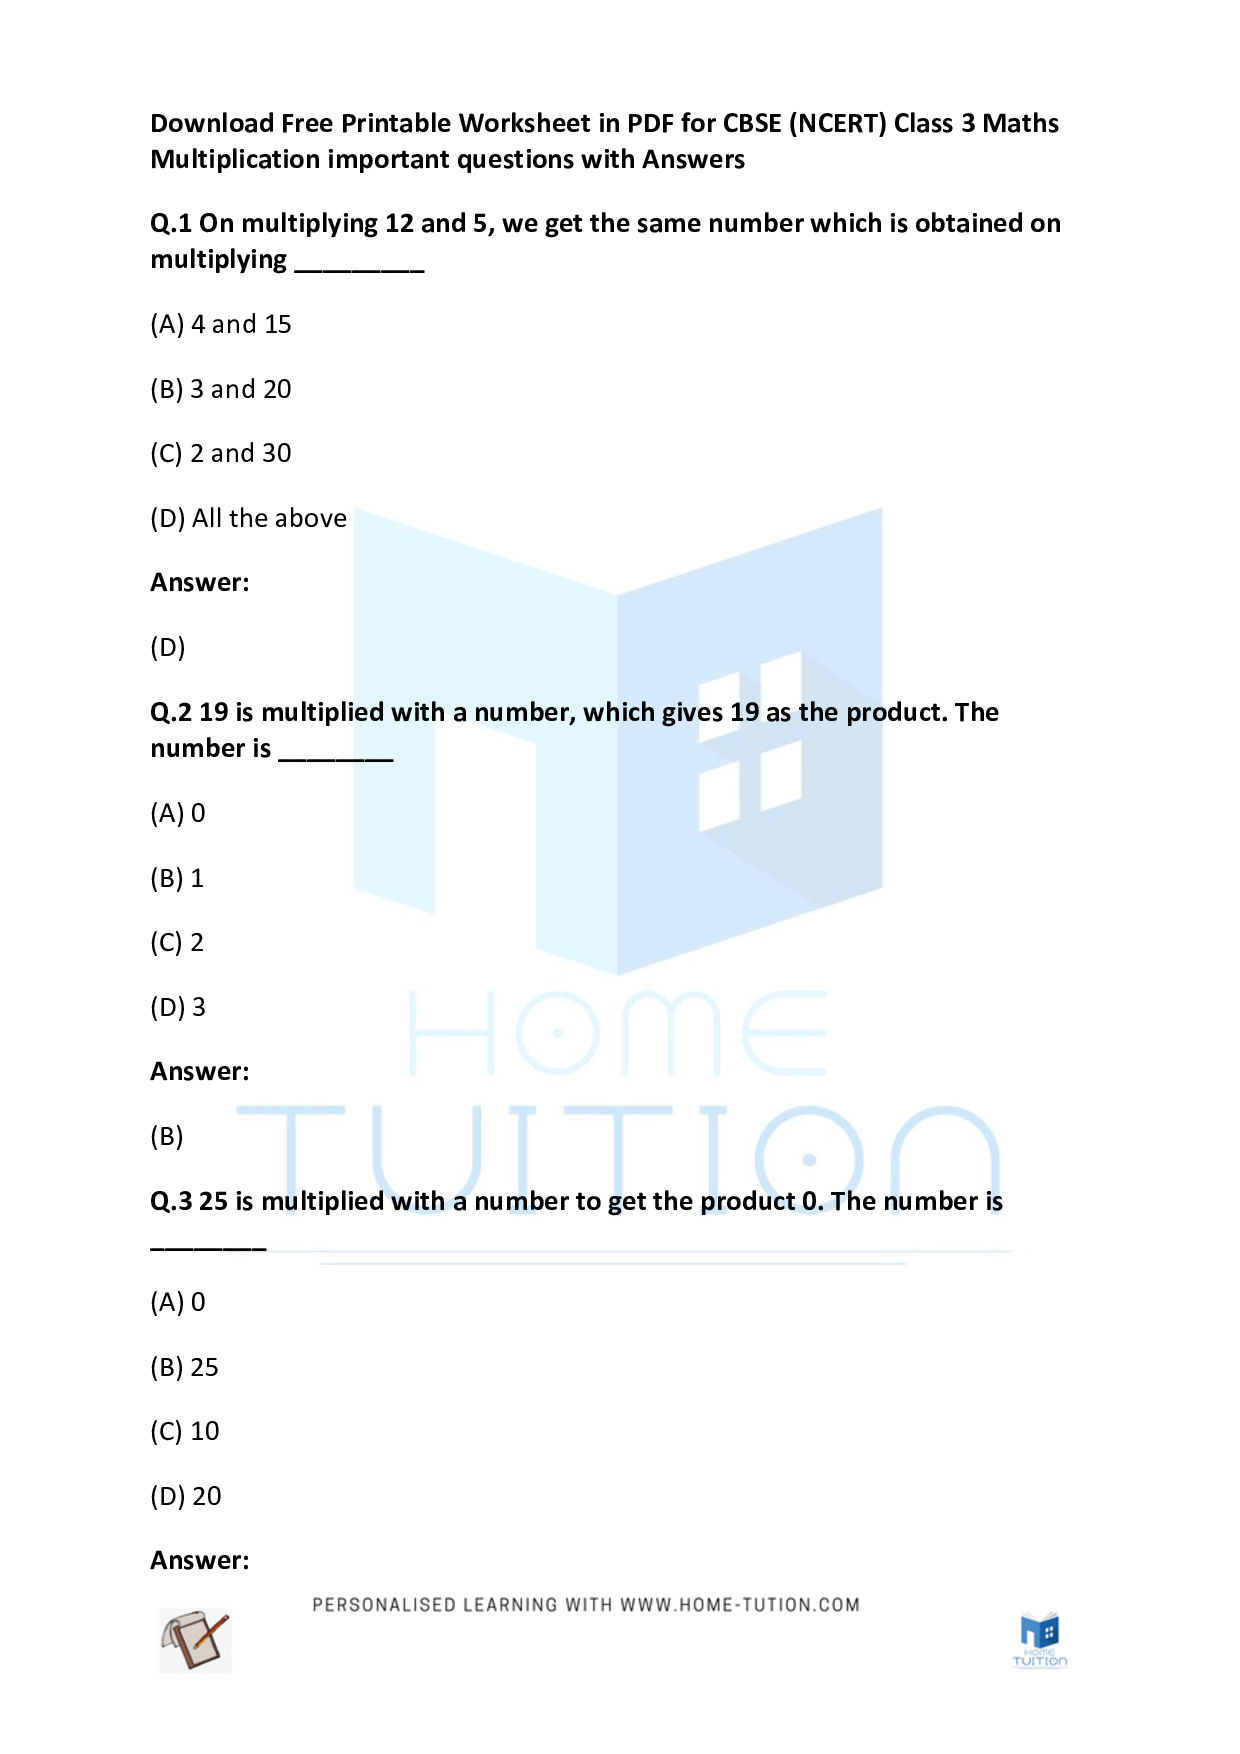 CBSE Class 3 Maths Multiplication Worksheet Questions with Answers PDF 